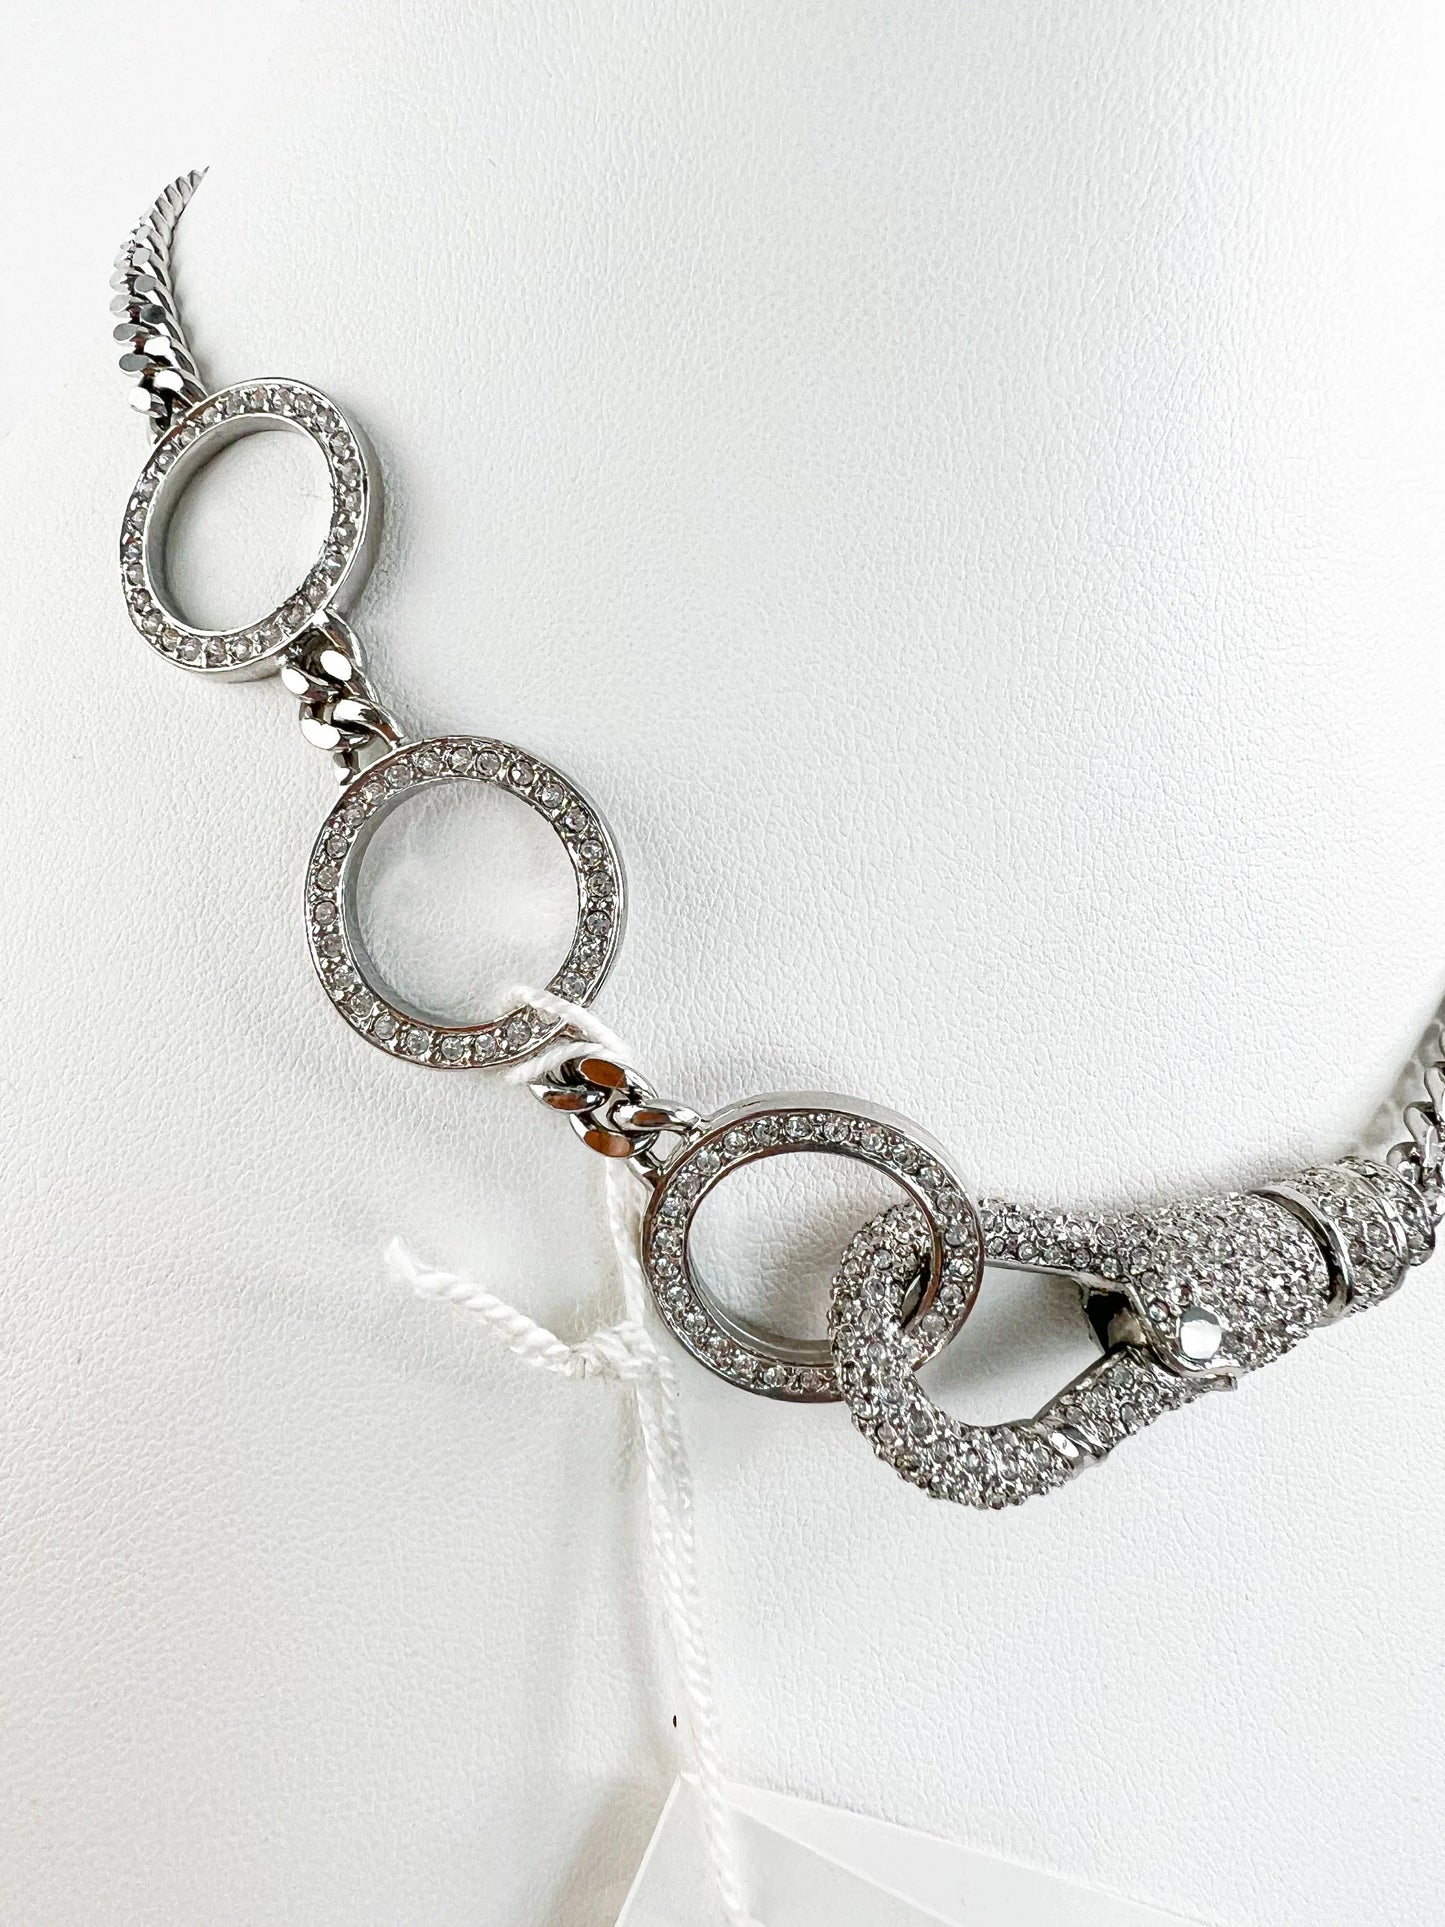 Vintage Christian Dior HARDCORE Necklace, Silver Tone Chain Necklace, Rare JOHN GALLIANO, Vintage Costume Jewelry, Jewelry for women